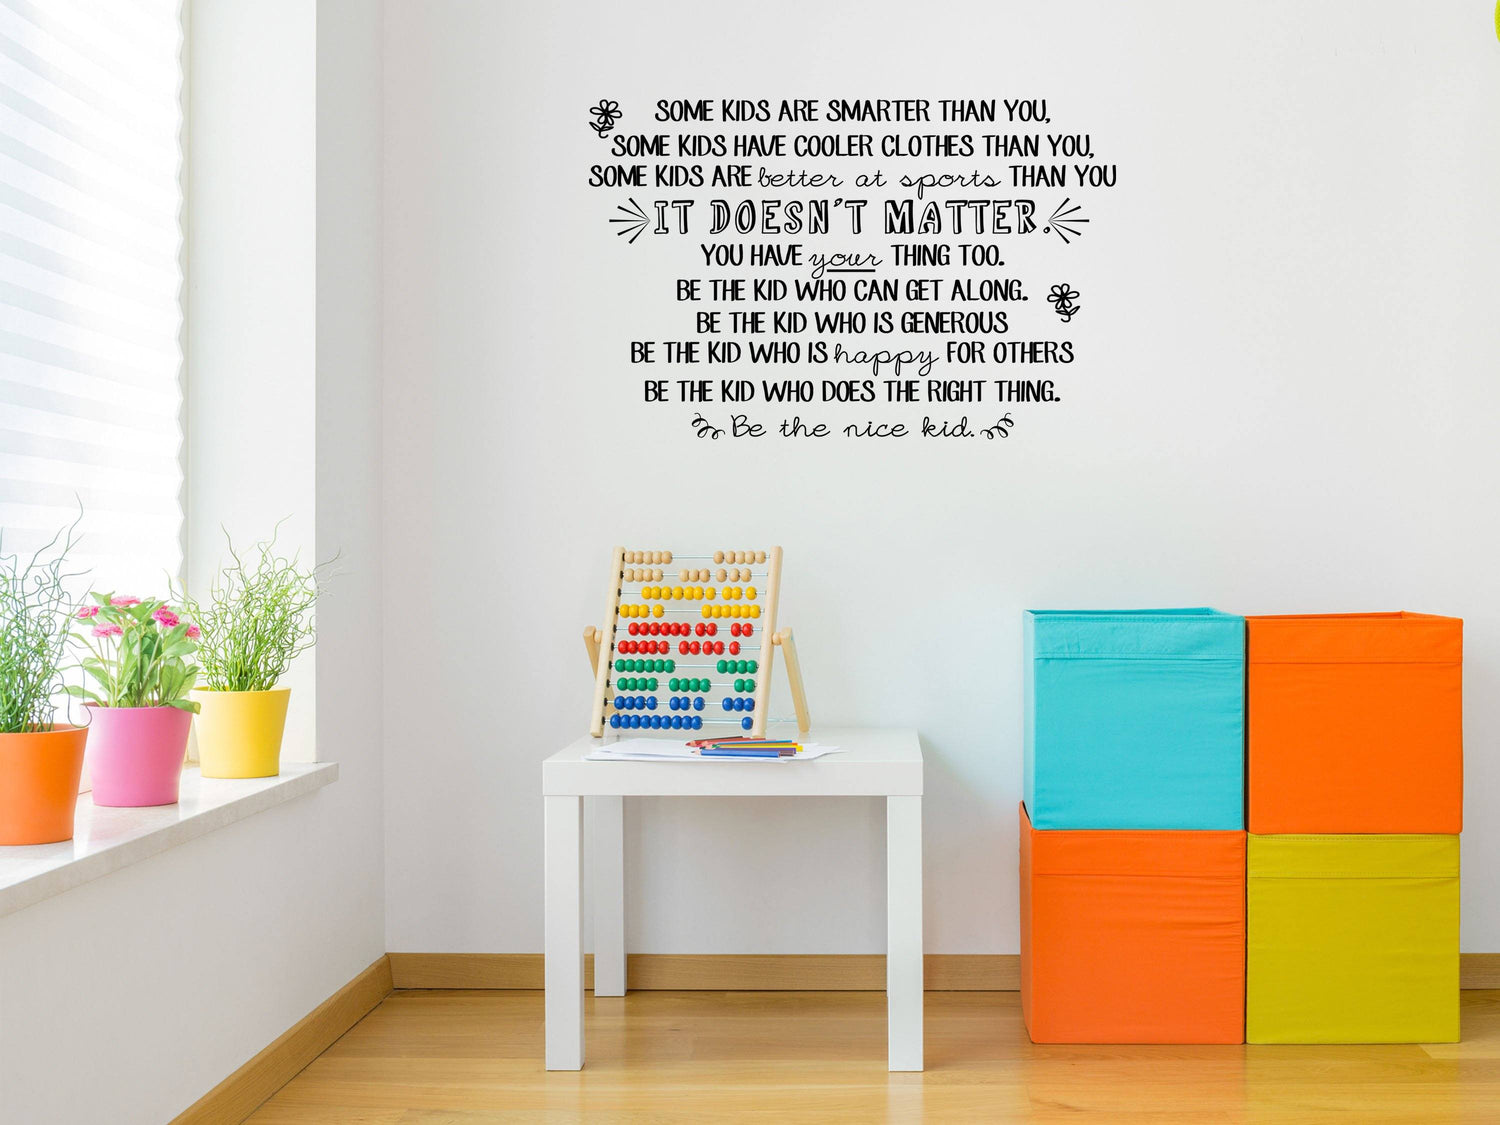 Be The Nice Kid Wall Decal - Kids Wall Sticker Art - Be The Nice Kid Wall Sign - Classroom Decor - School Room Wall Art Vinyl Wall Decal Done 